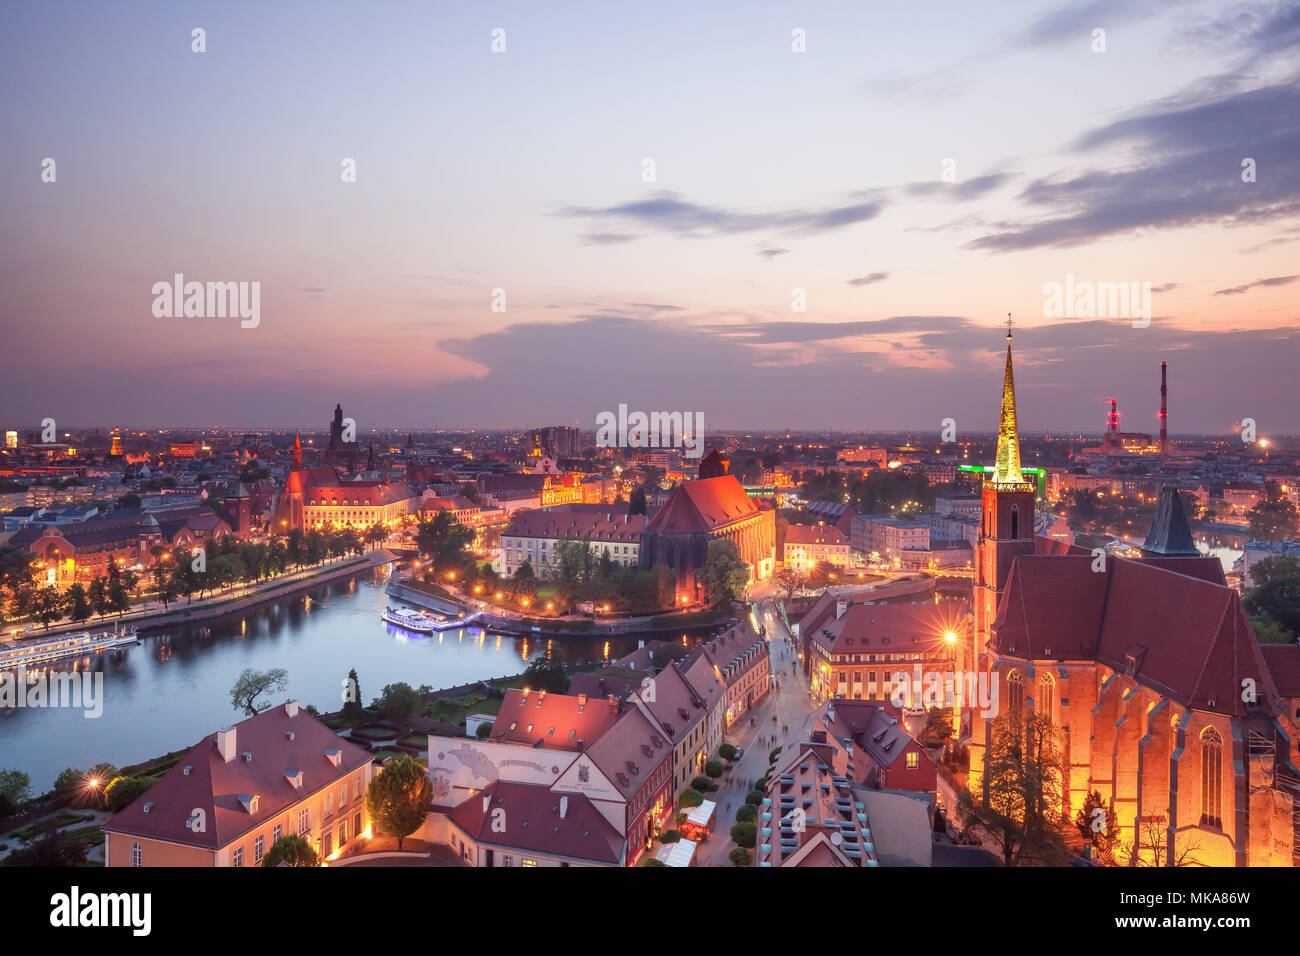 Wroclaw city in Poland aerial view at night Stock Photo